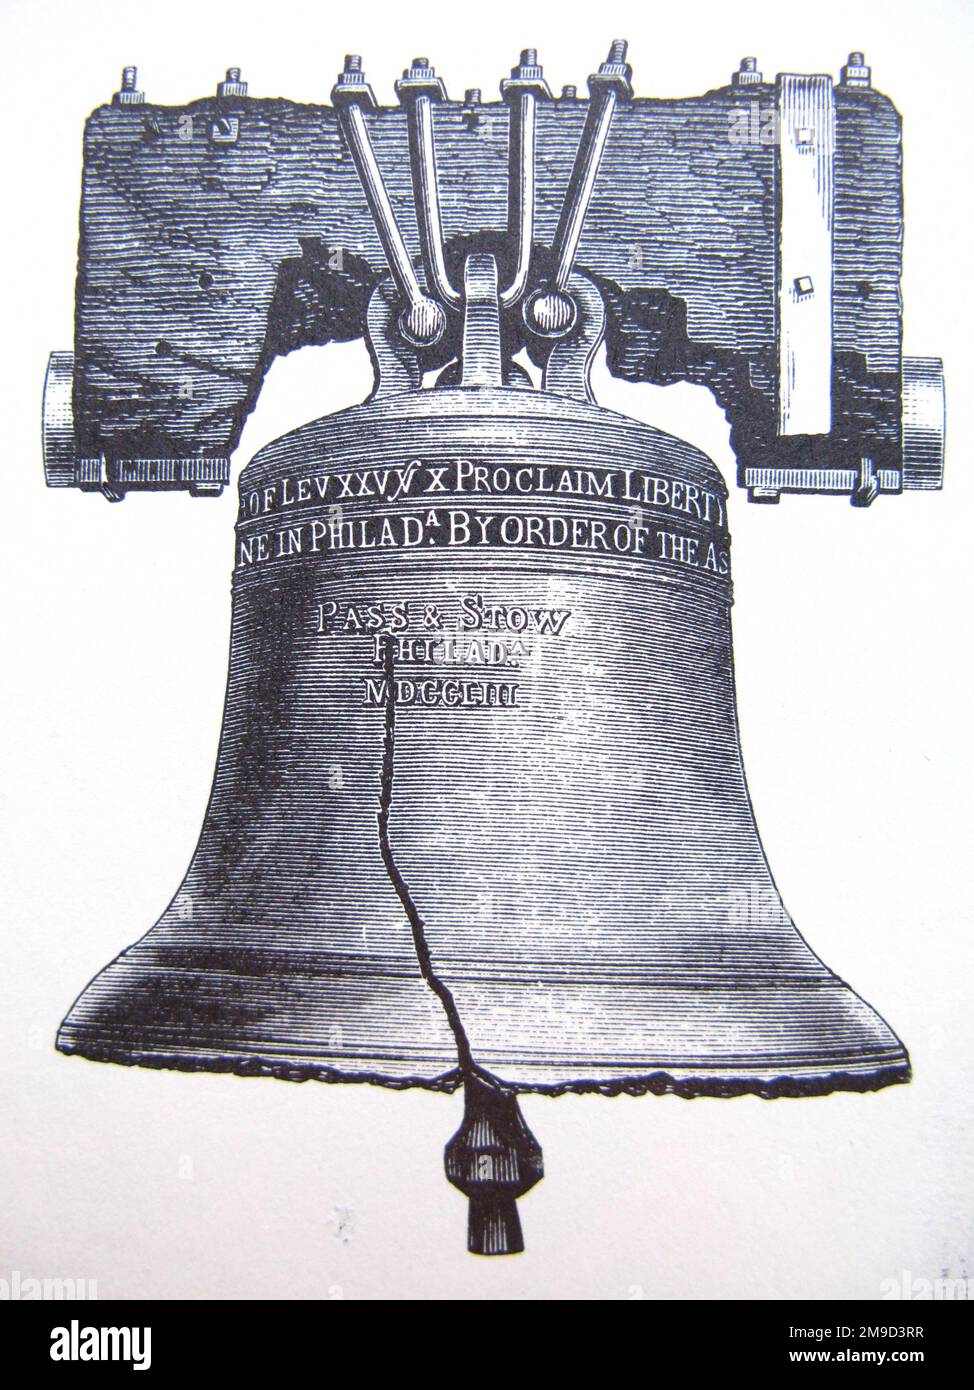 Liberty Bell, Philadelphia. Famously symbolising America, it is dated 1753. The Biblical text reads 'Proclaim Liberty throughout all the Land unto all the Inhabitants Thereof'. In 1776 it was rung to celebrate Independence. The bell was cast in London but cracked on its first trial. It was re-cast in Philadelphia but cracked again in 1835. Stock Photo